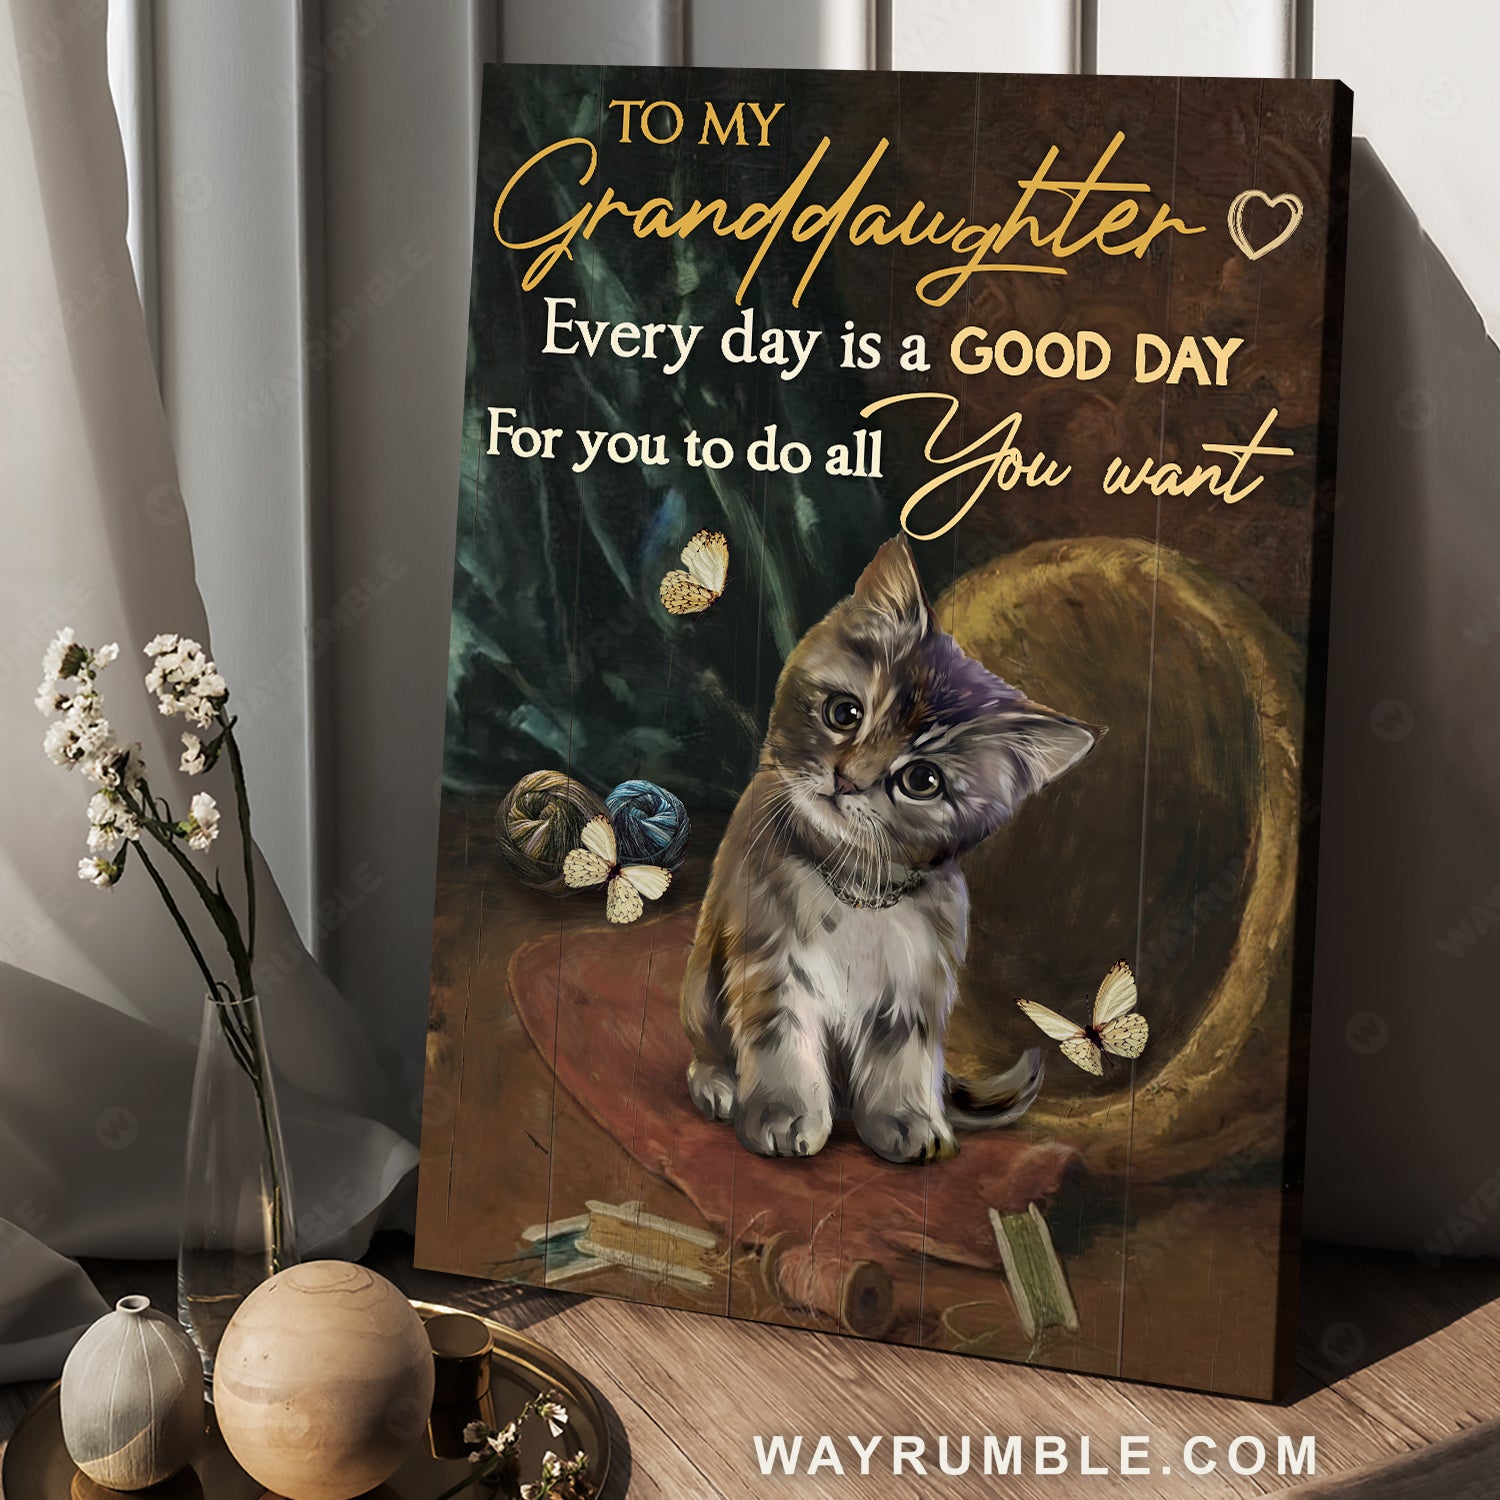 Grandma to granddaughter, Little cat, Yellow butterfly, Every day is a good day - Family Portrait Canvas Prints, Wall Art